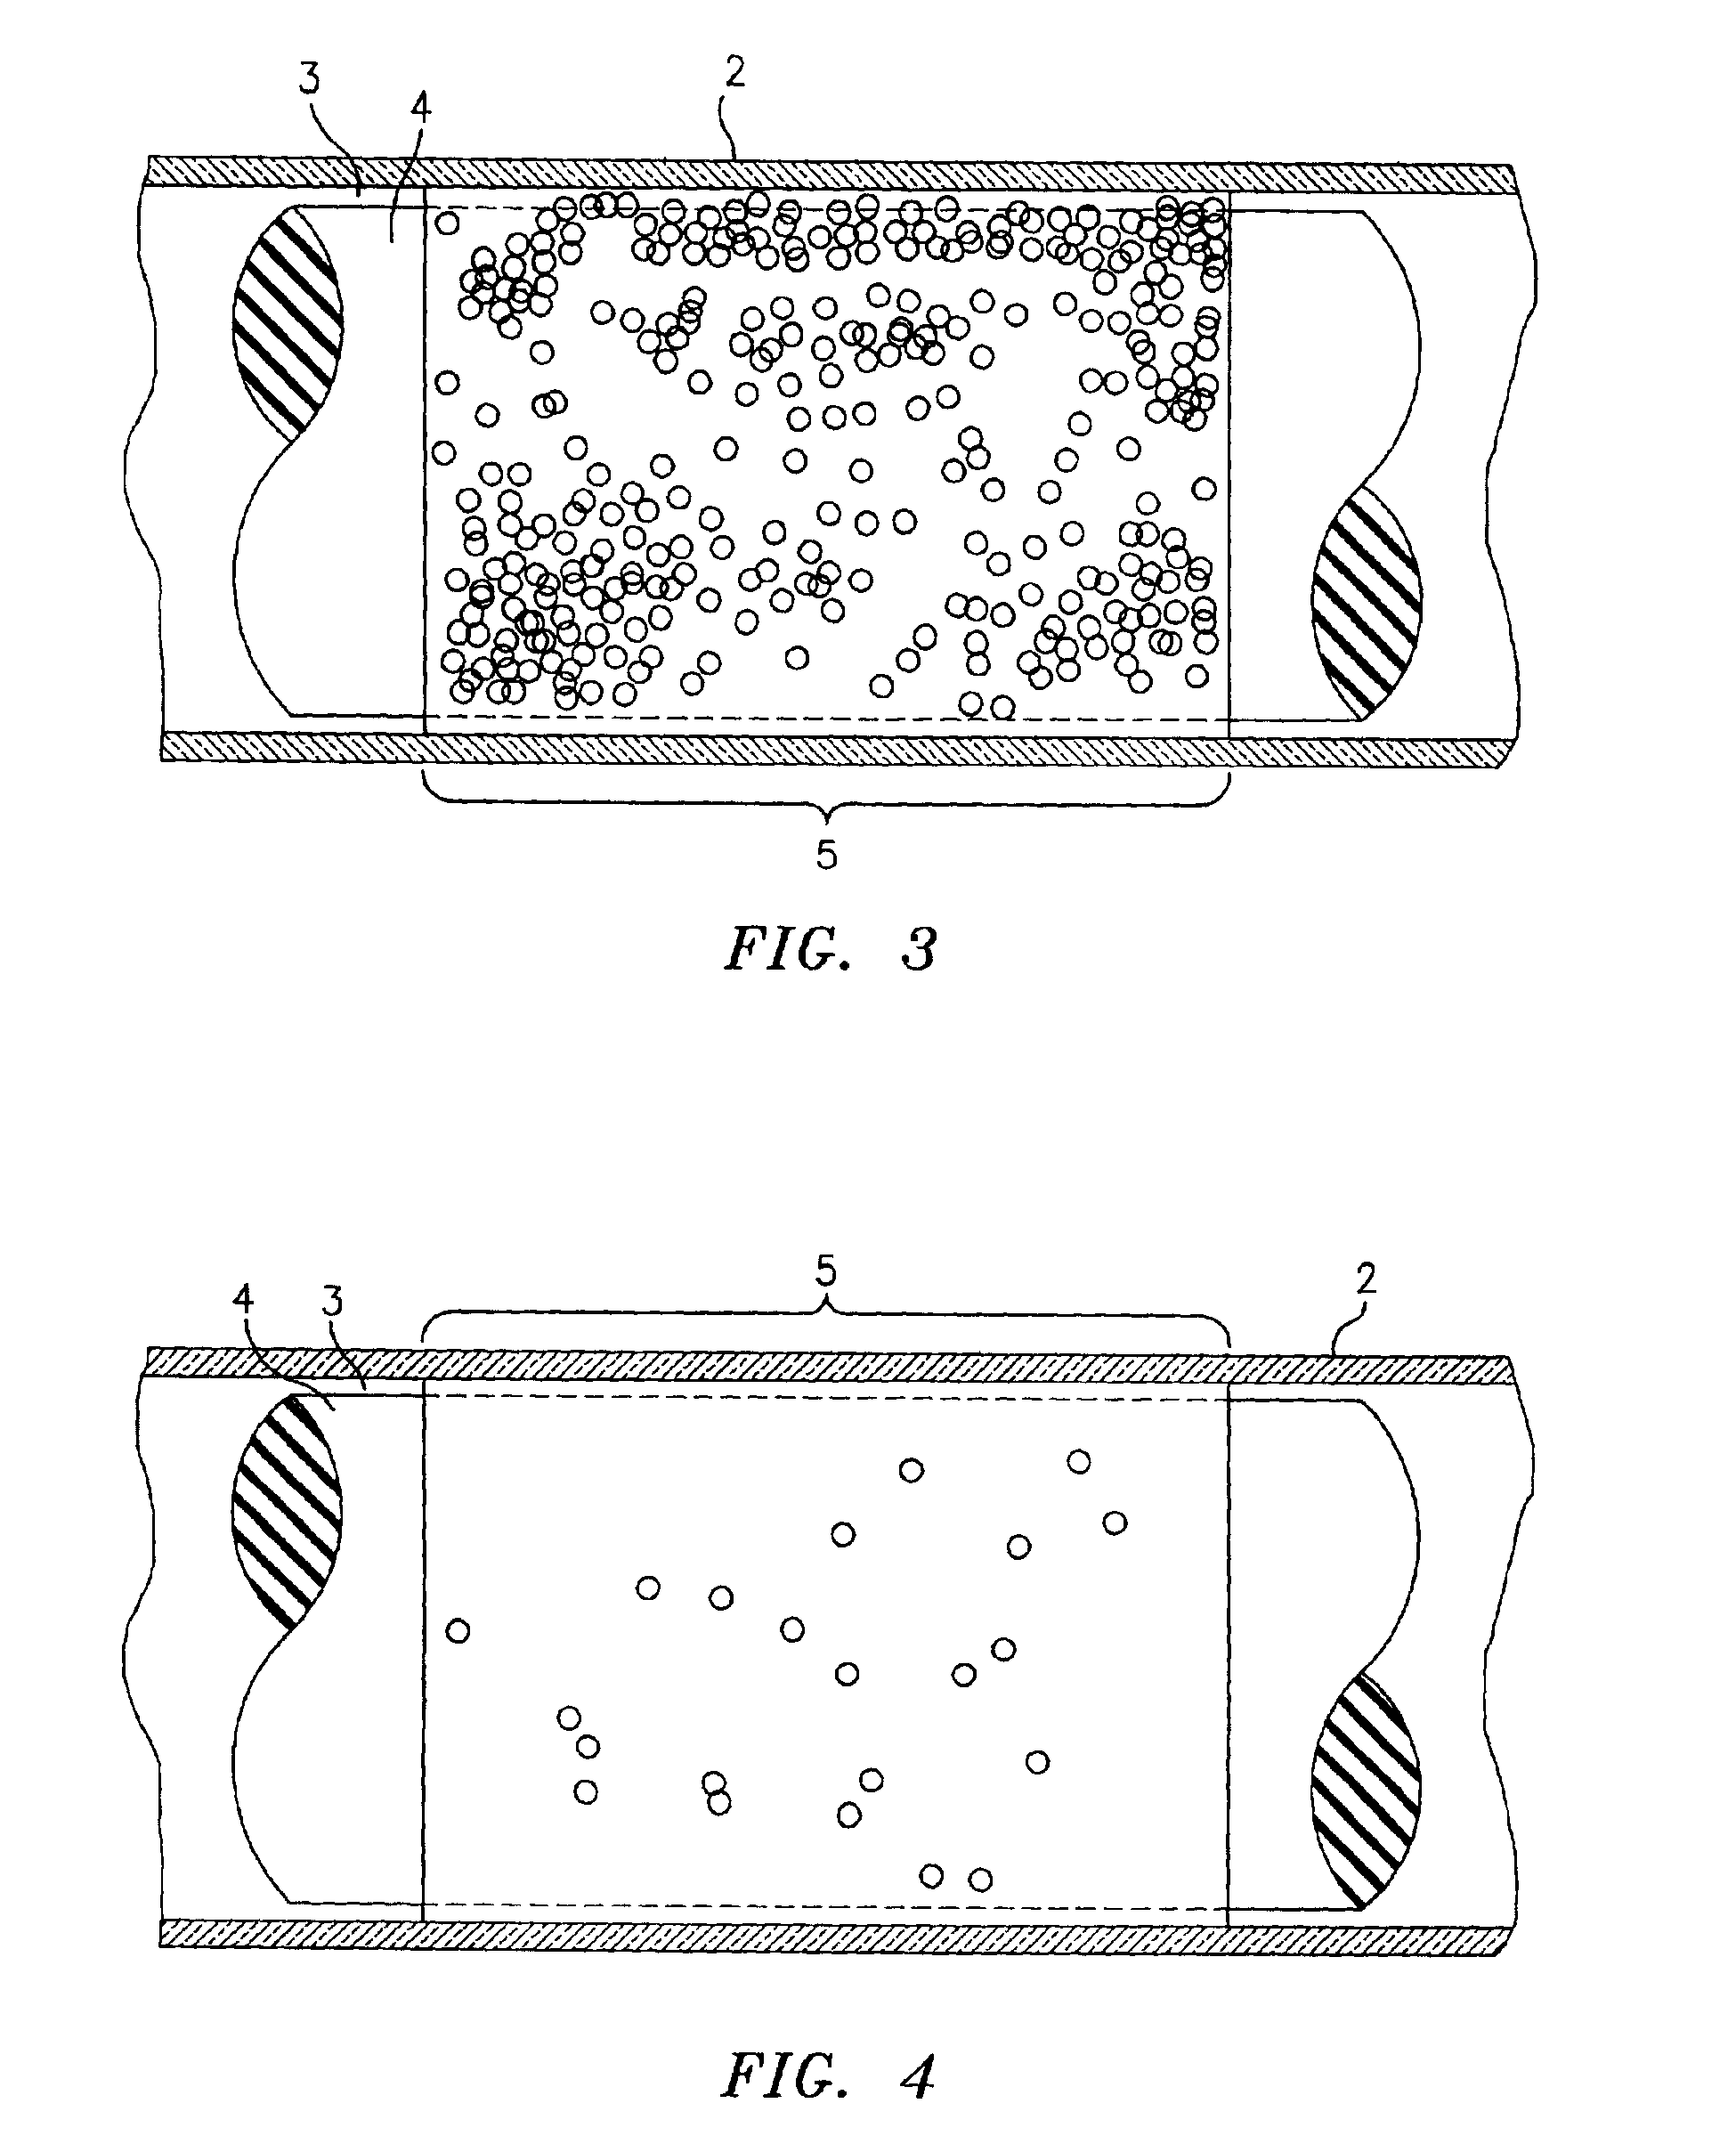 Method for the detection, identification, enumeration and confirmation of virally infected cells and other epitopically defined cells in whole blood